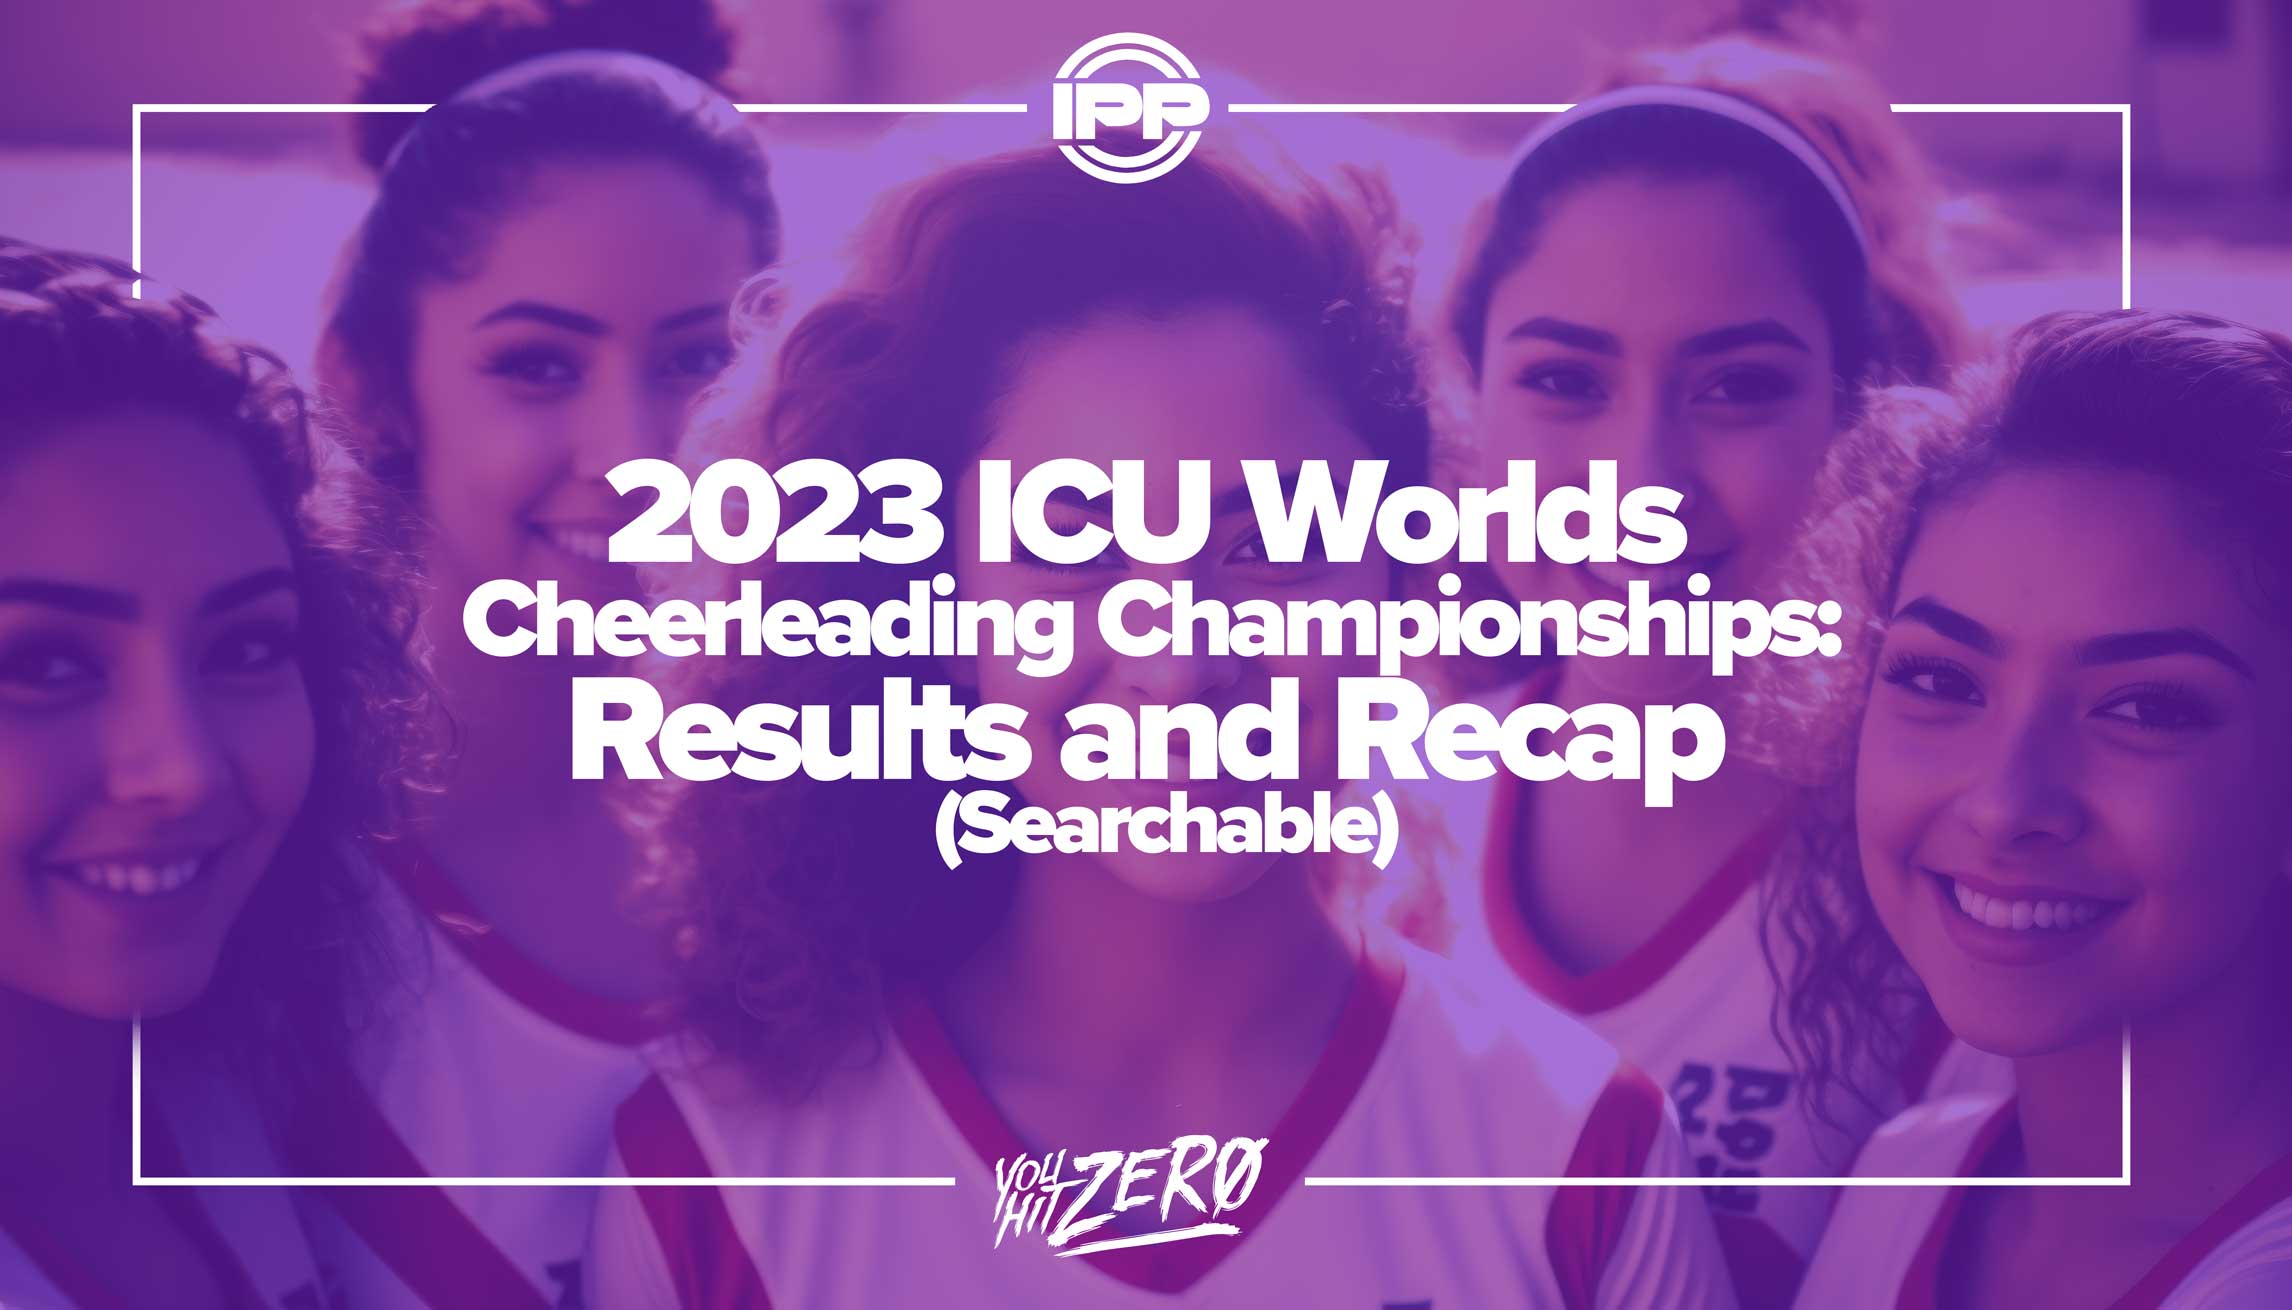 2023 ICU Worlds Cheerleading Championships Results and Recap